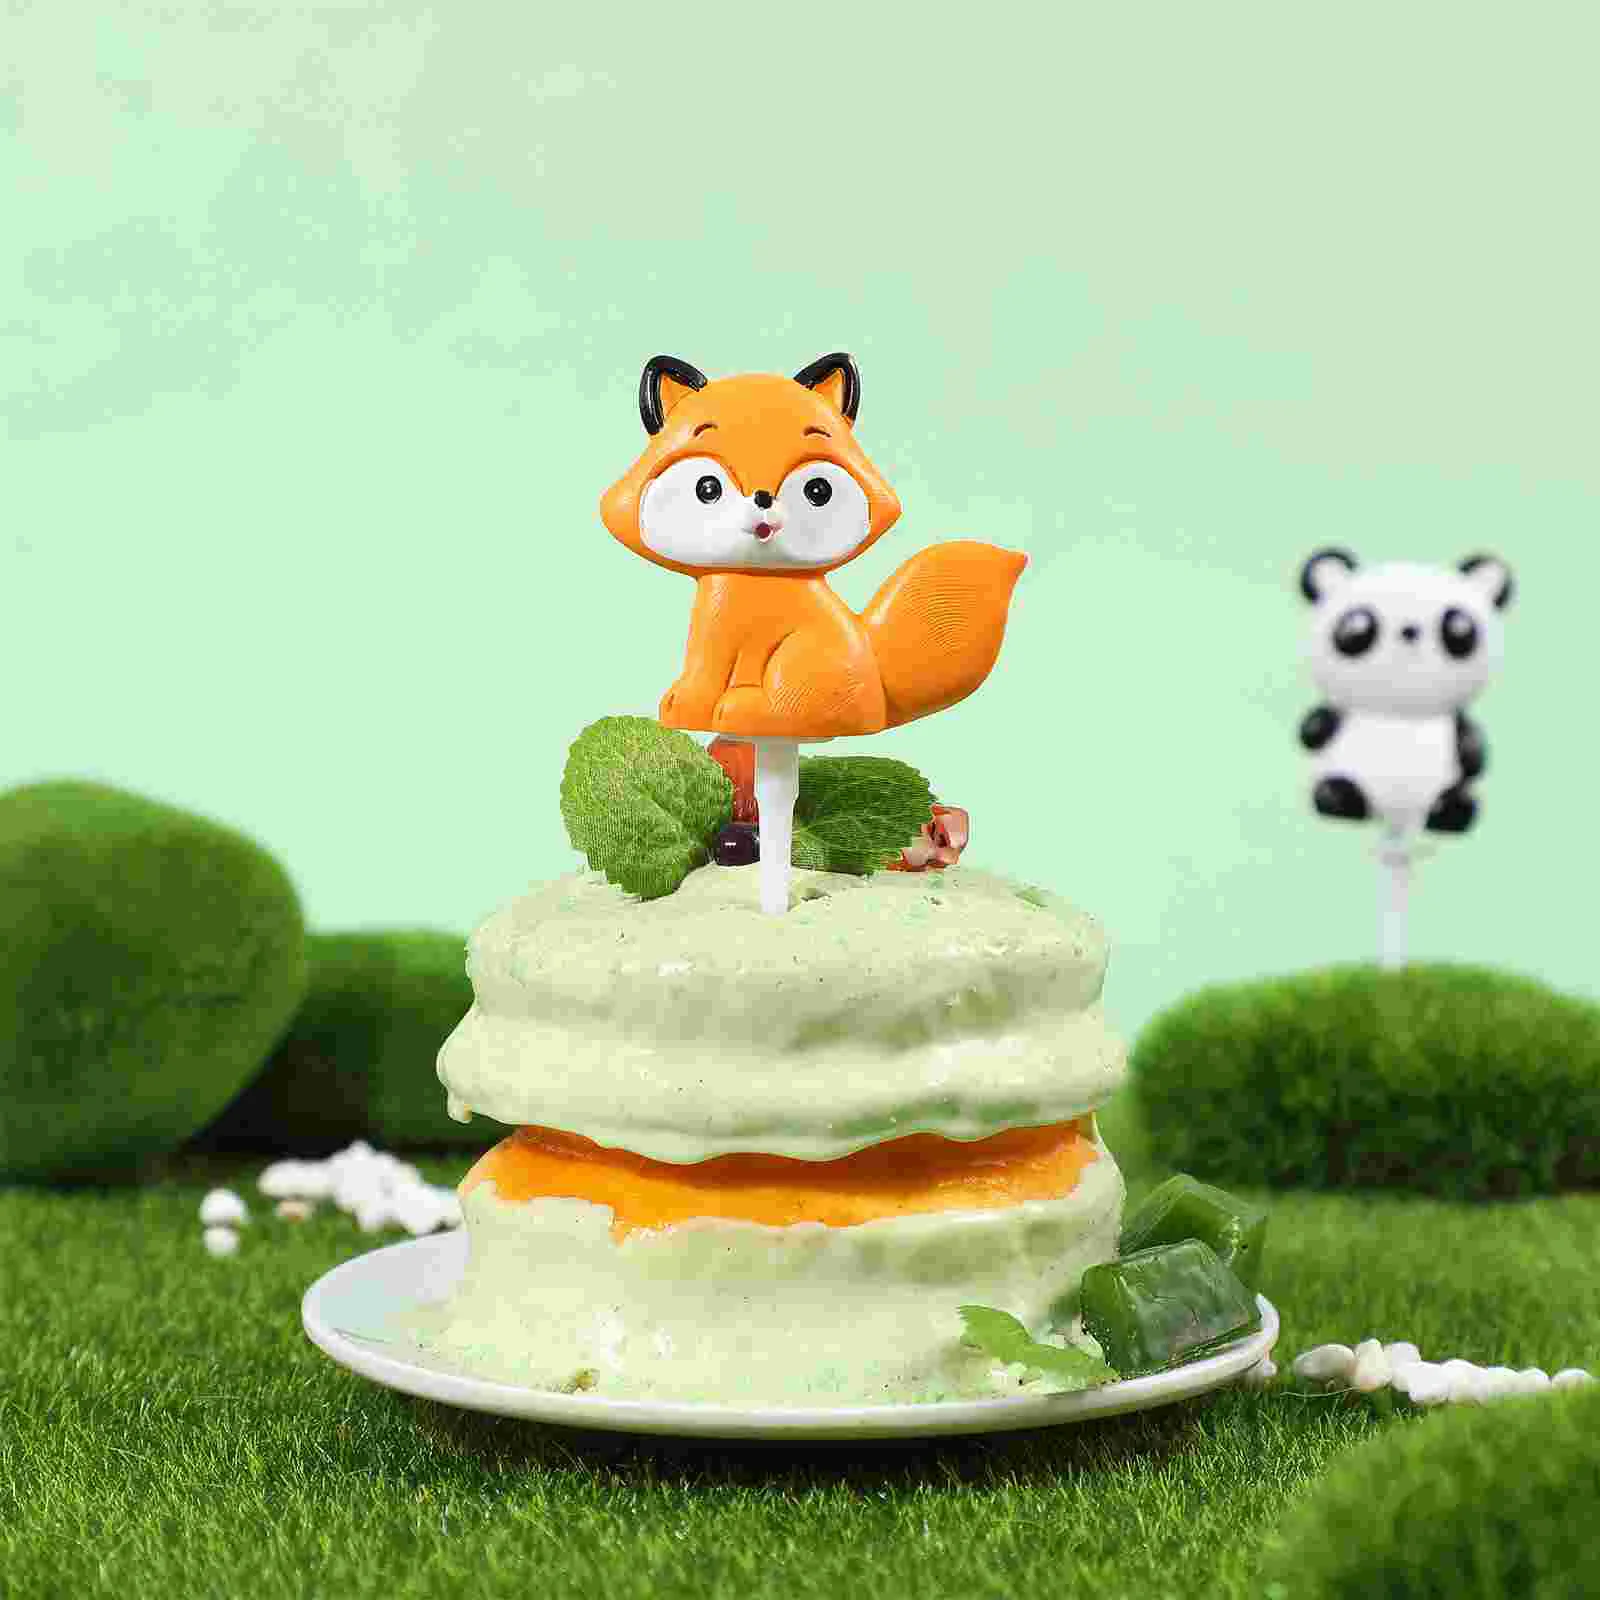 

Toyvian 5Pcs Jungle Animals Cake Toppers Party Cake Insert Decoration Party Favors